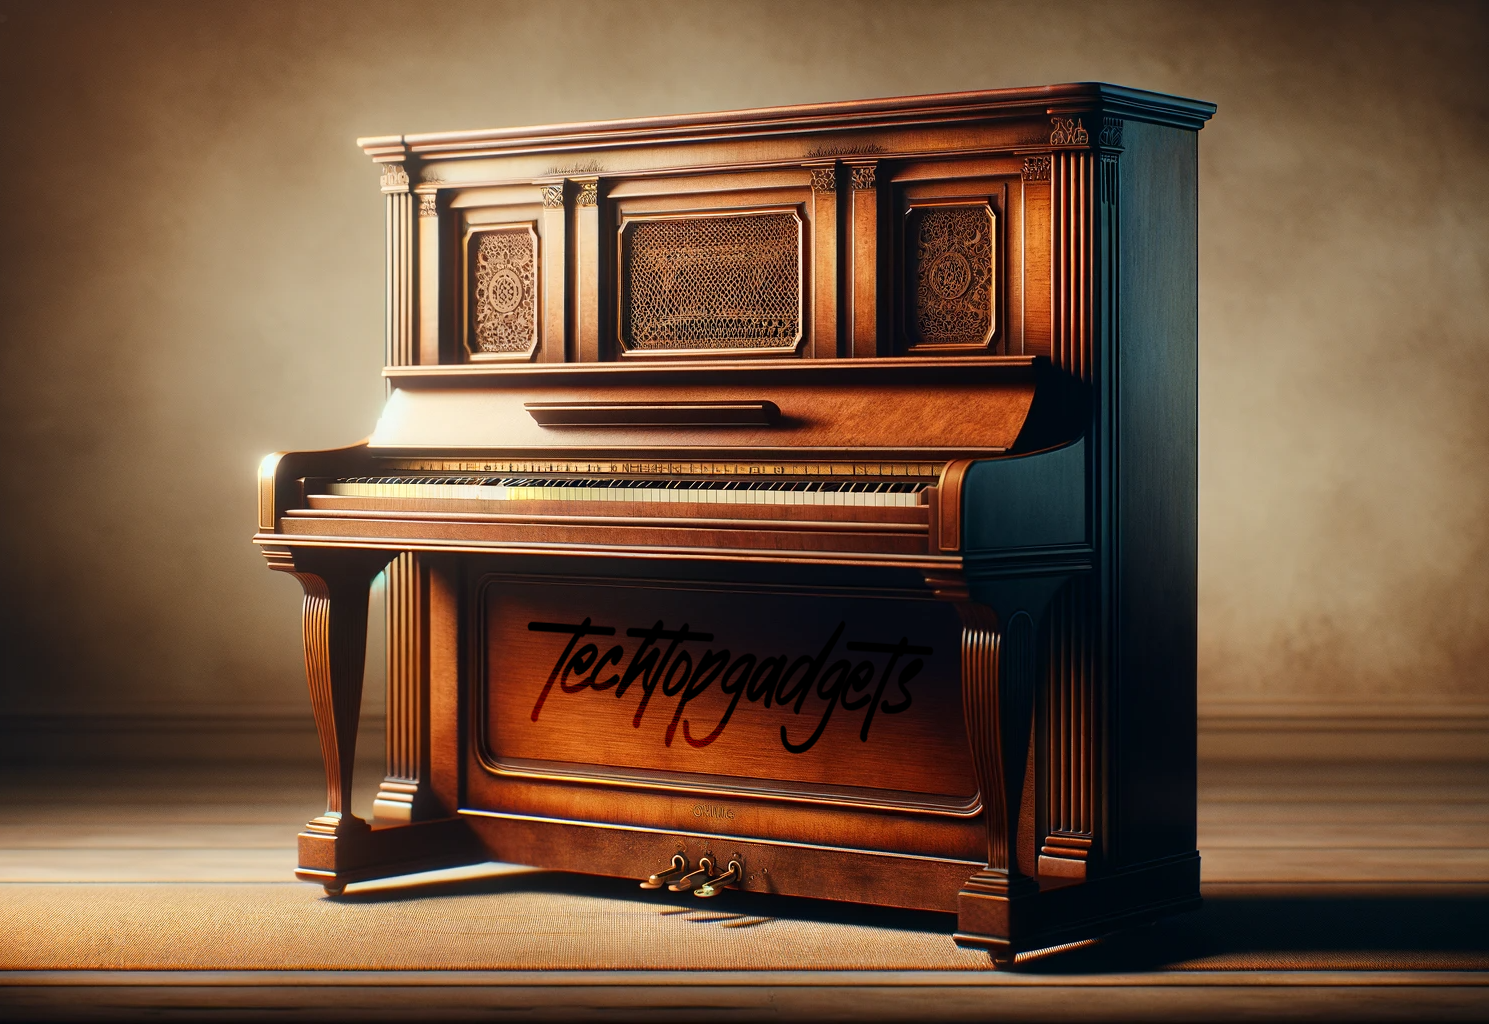 This artistic rendition of a vintage piano with "Techtopgadgets" branding merges the worlds of music and art, embodying the essence of the best digital pianos in a timeless form.